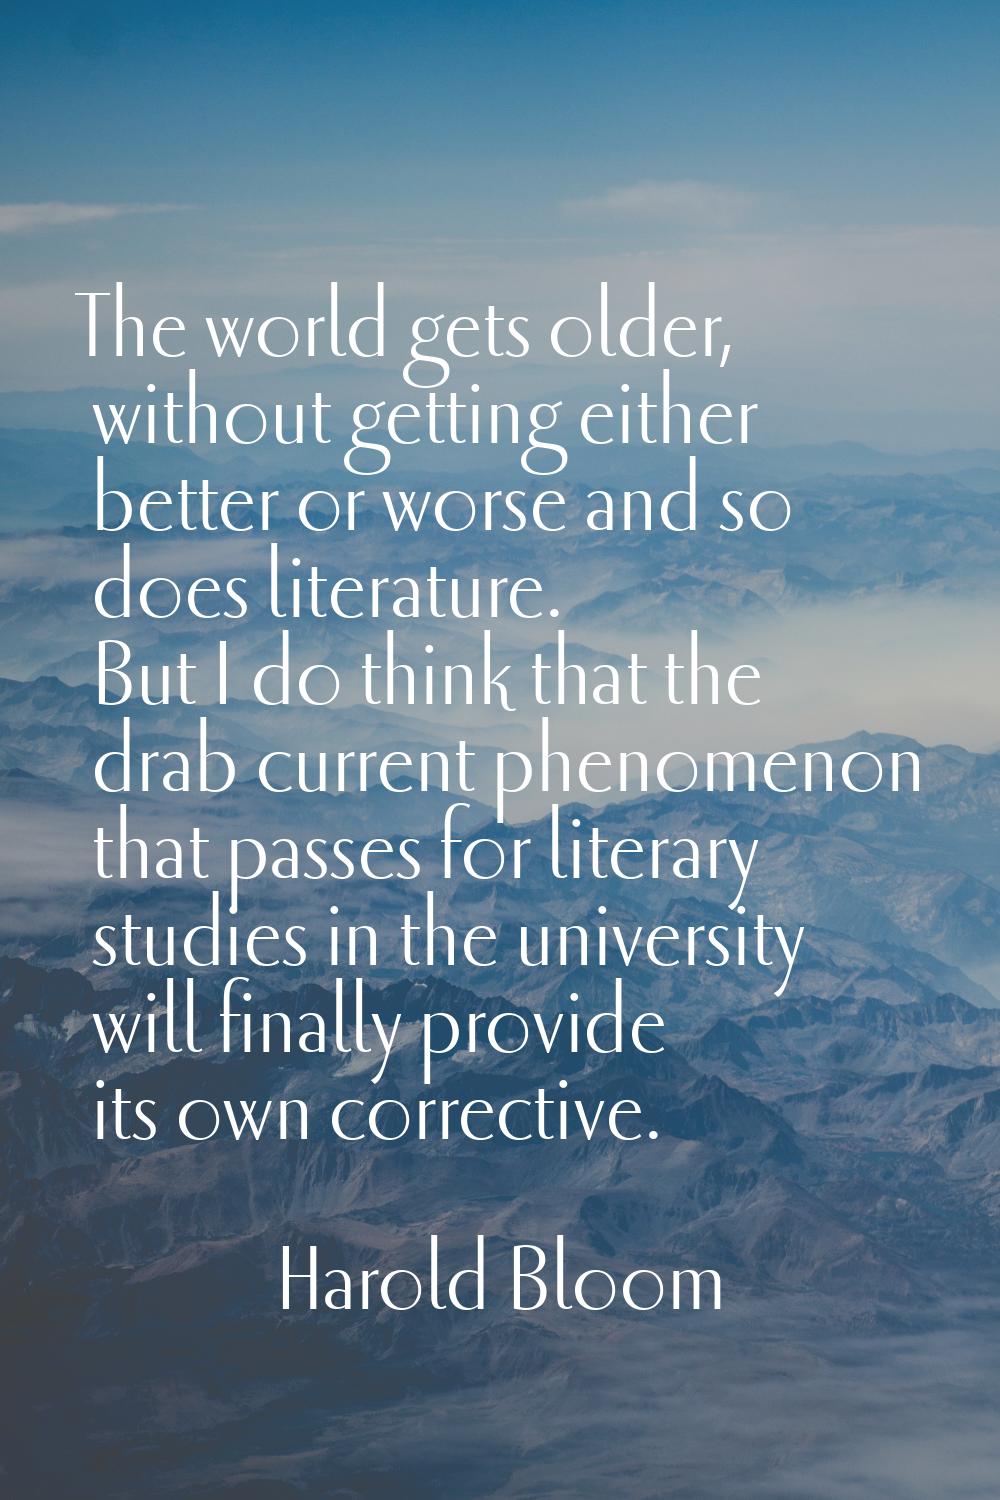 The world gets older, without getting either better or worse and so does literature. But I do think